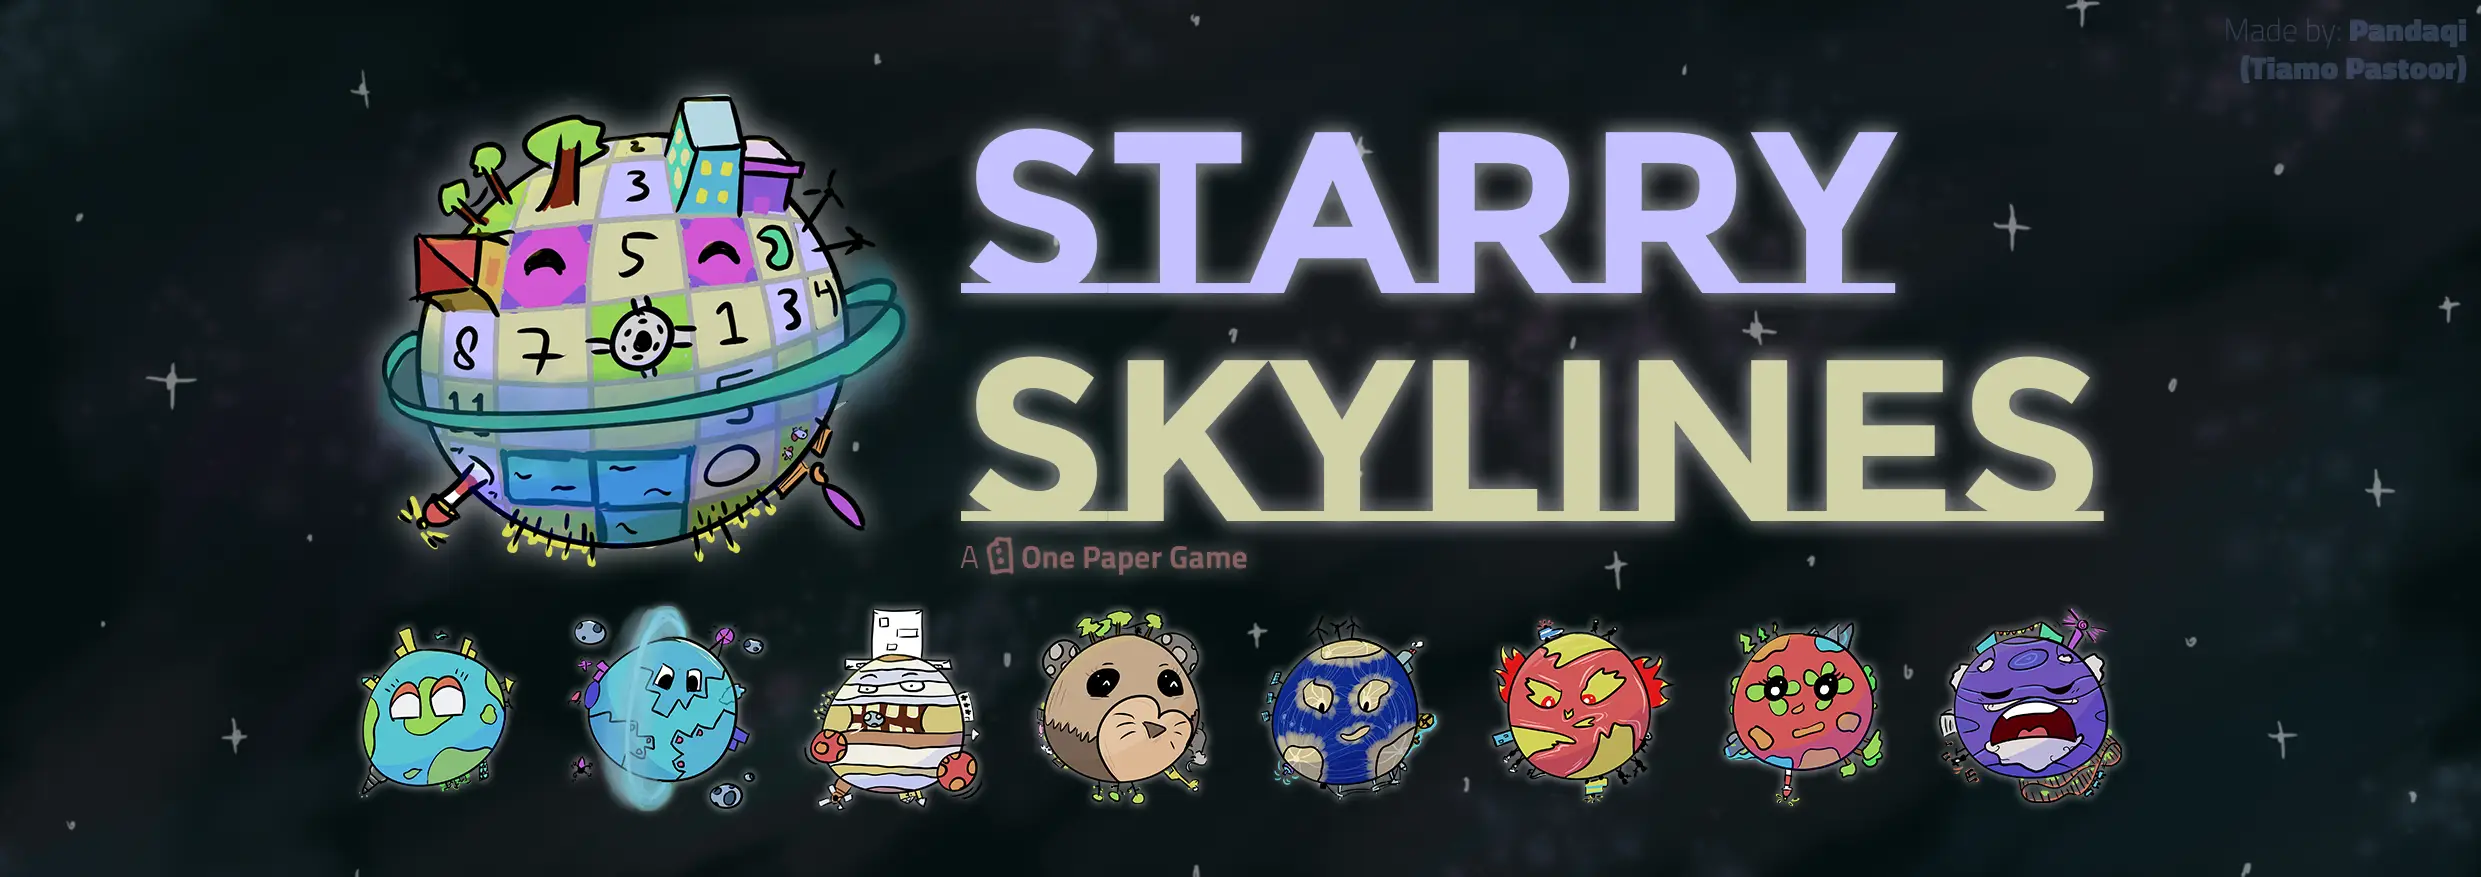 Thumbnail / Header for article: Starry Skylines (Part 1)